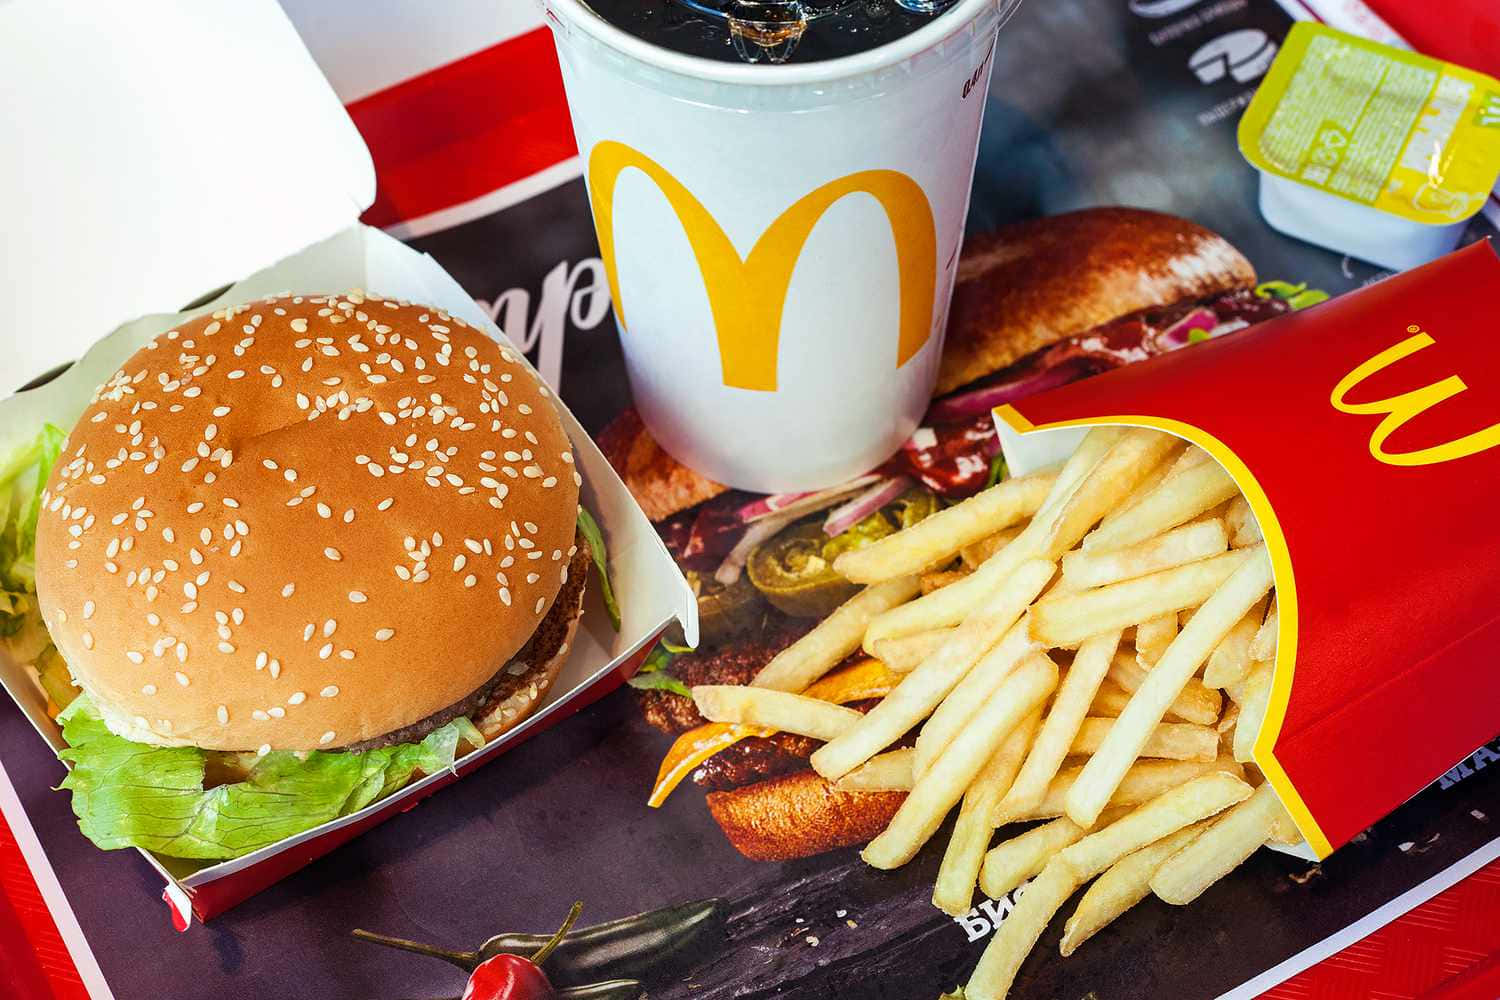 Savour the unforgettable flavours of classic McDonald's food